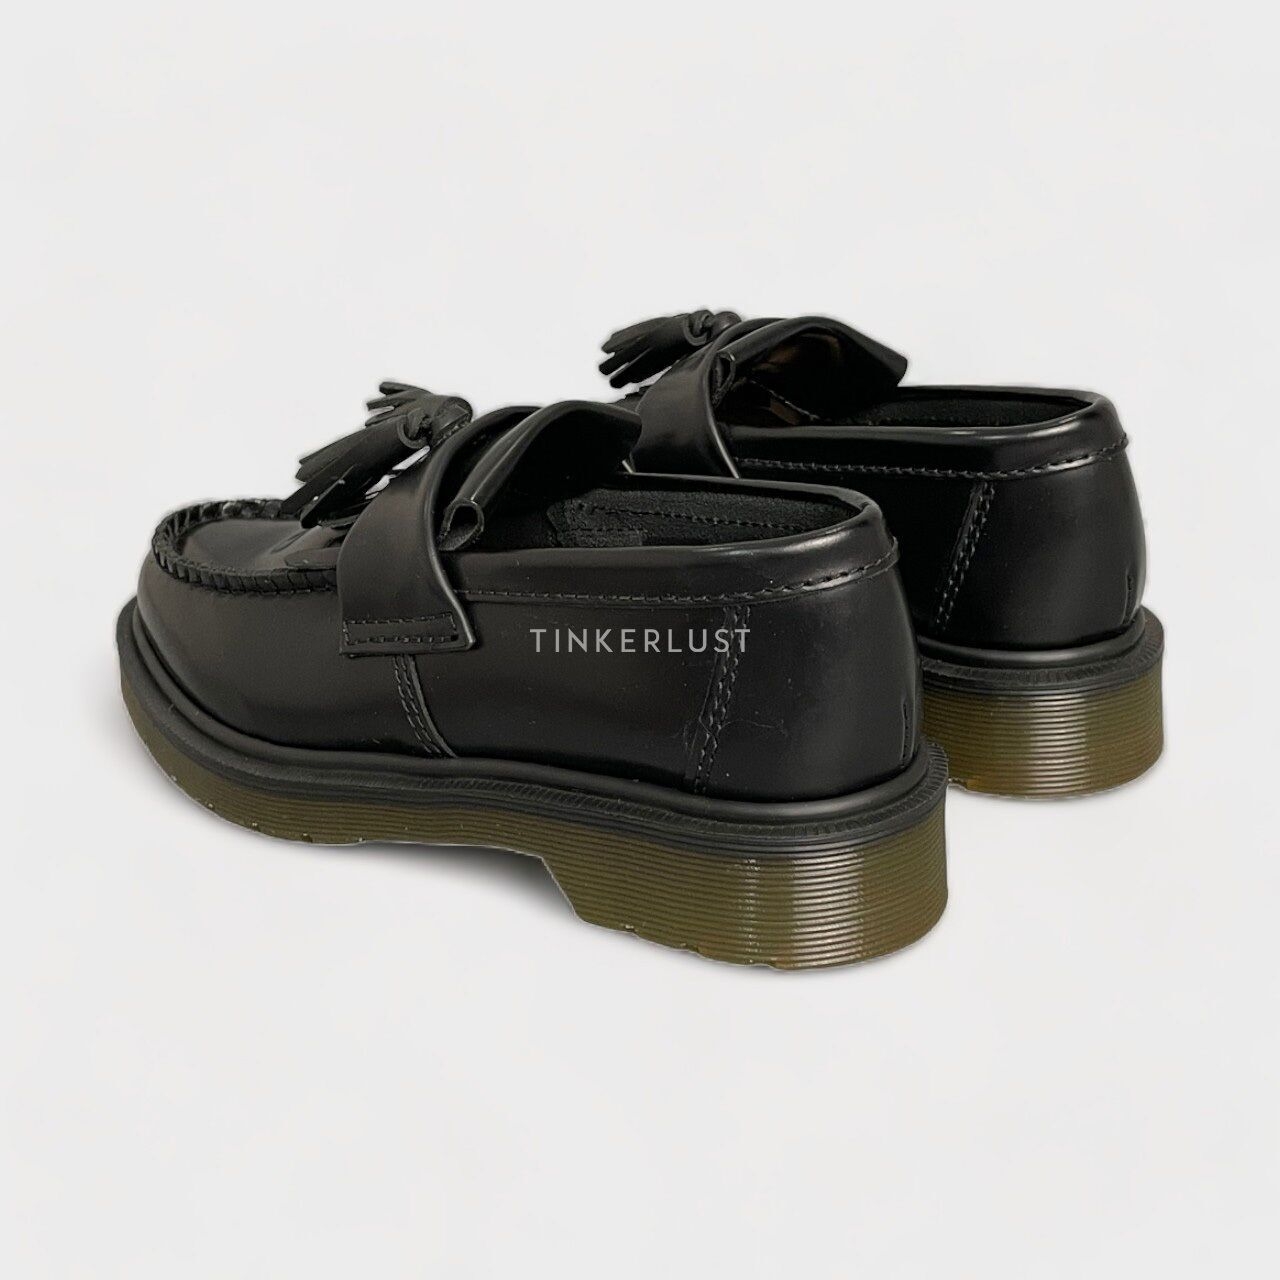 DRMARTENS Black Loafers